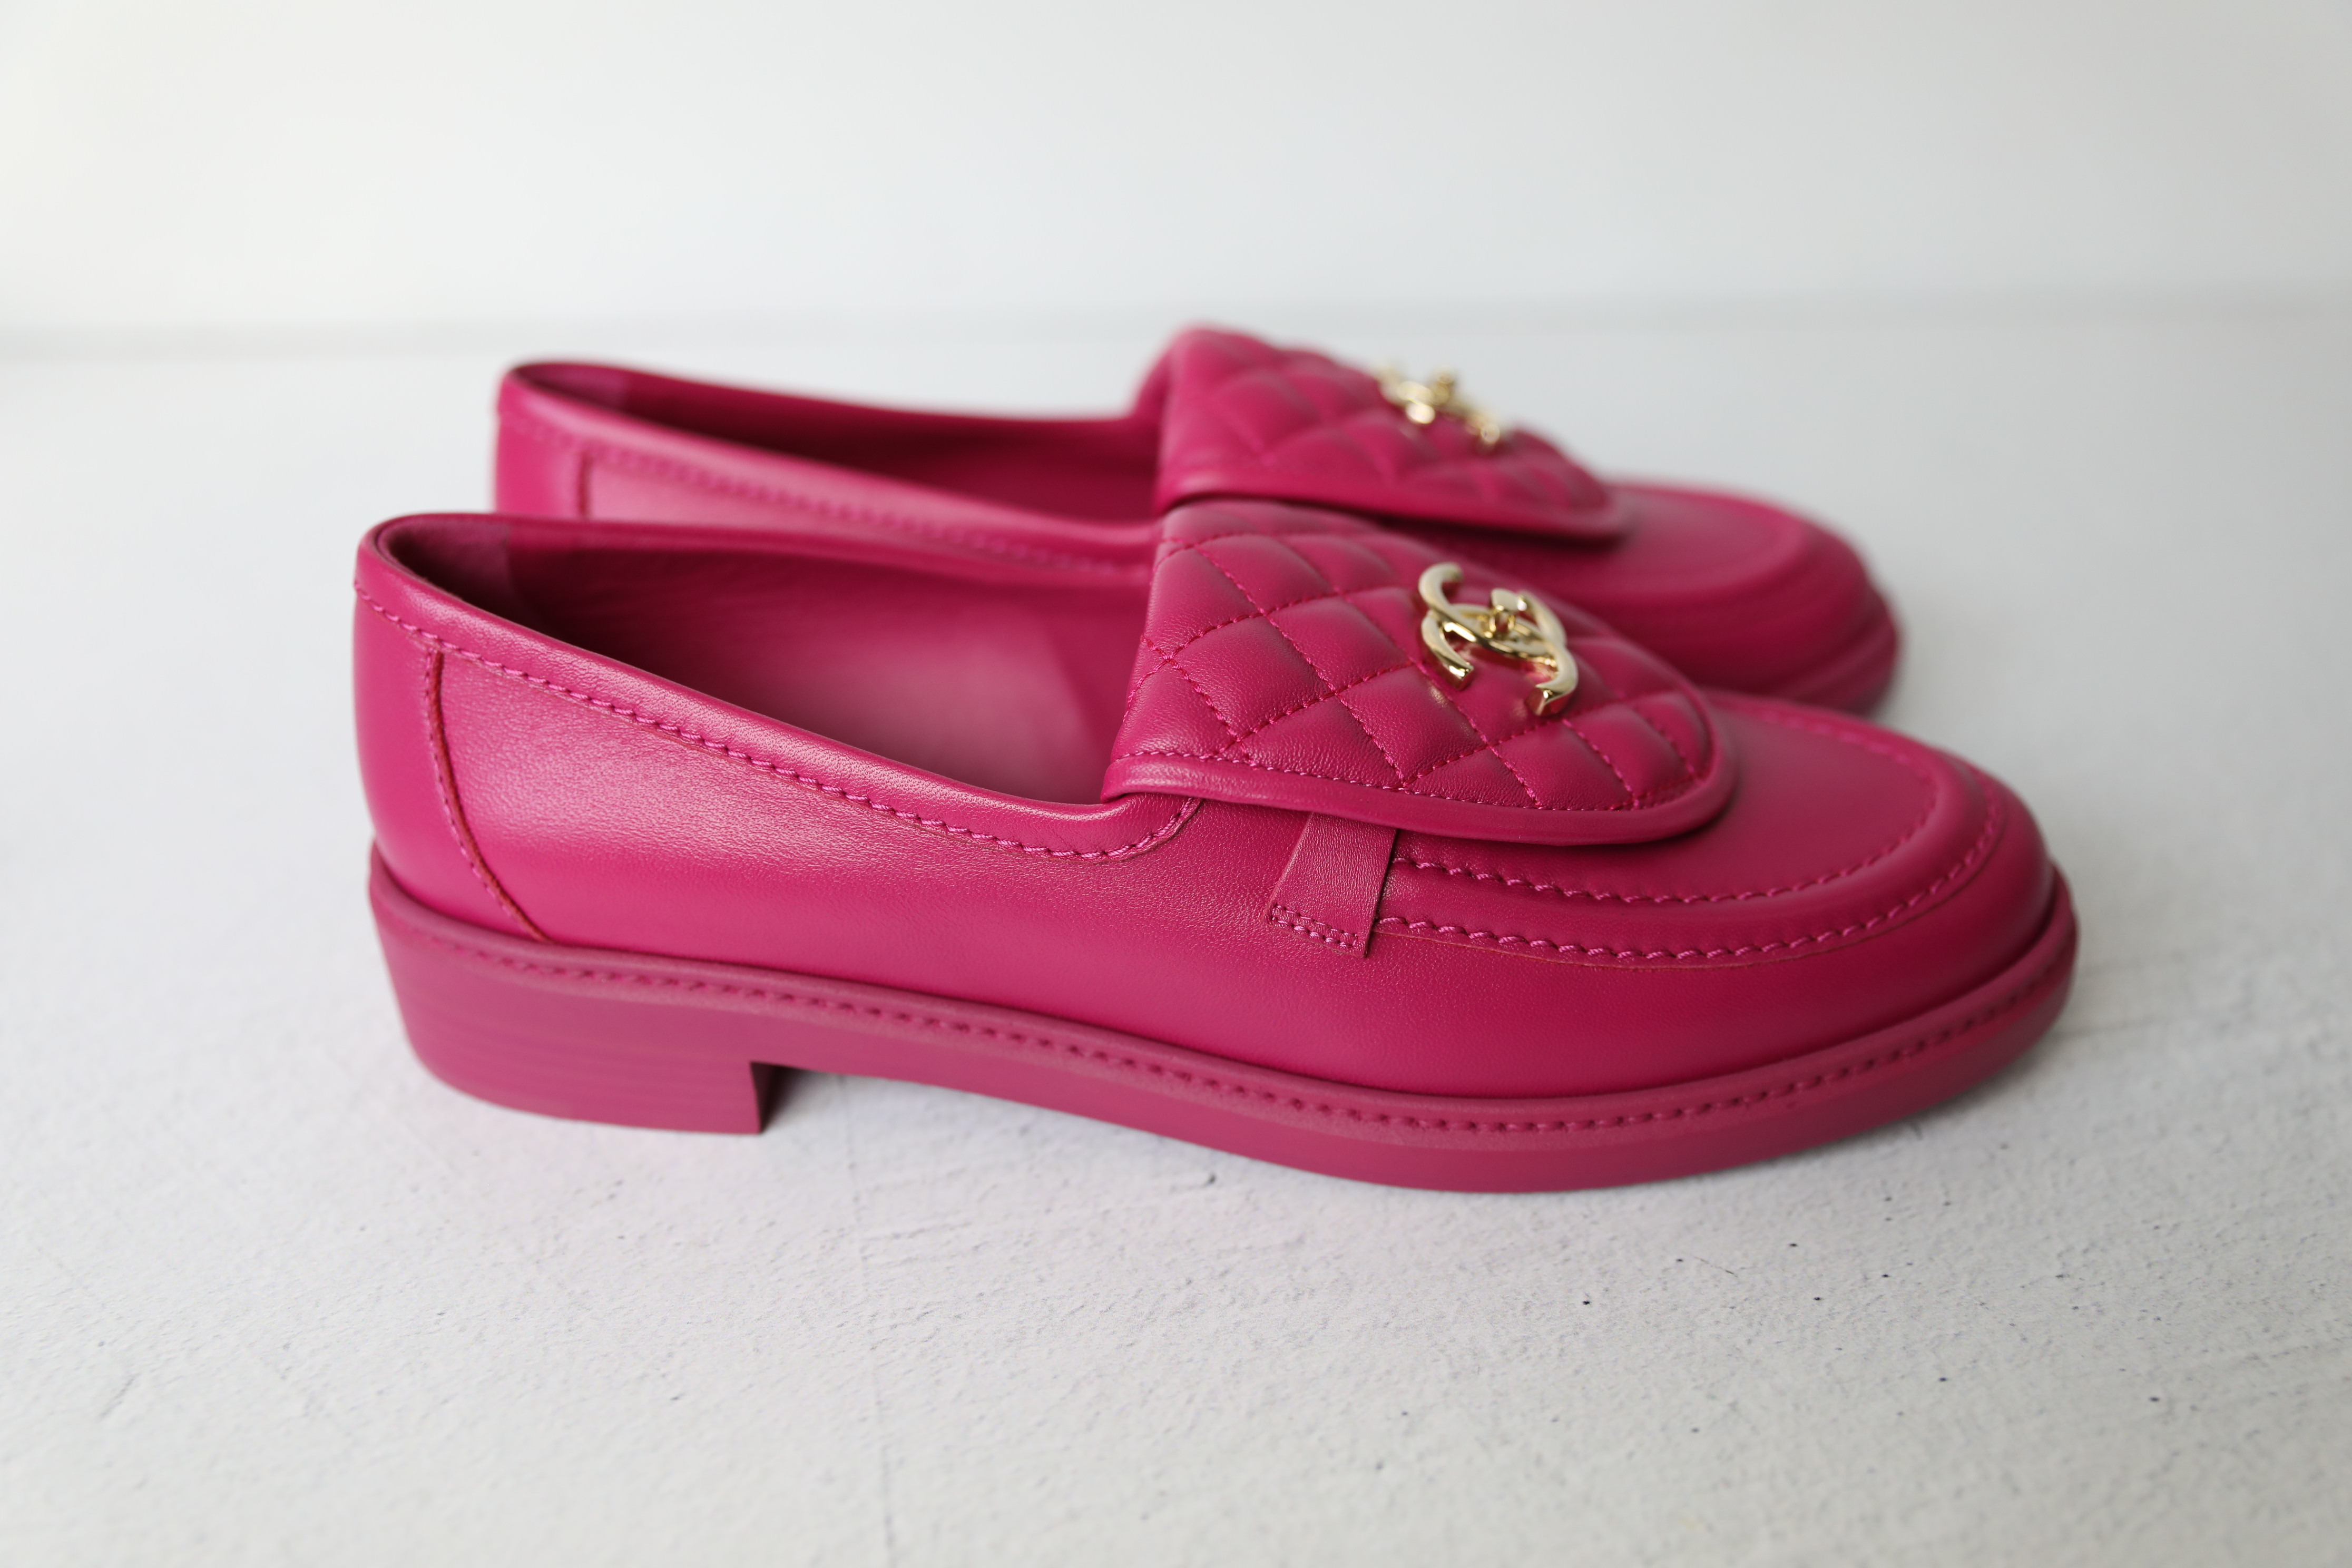 Chanel Turnlock Loafers, Bright Pink, Size 41, New in Box WA001